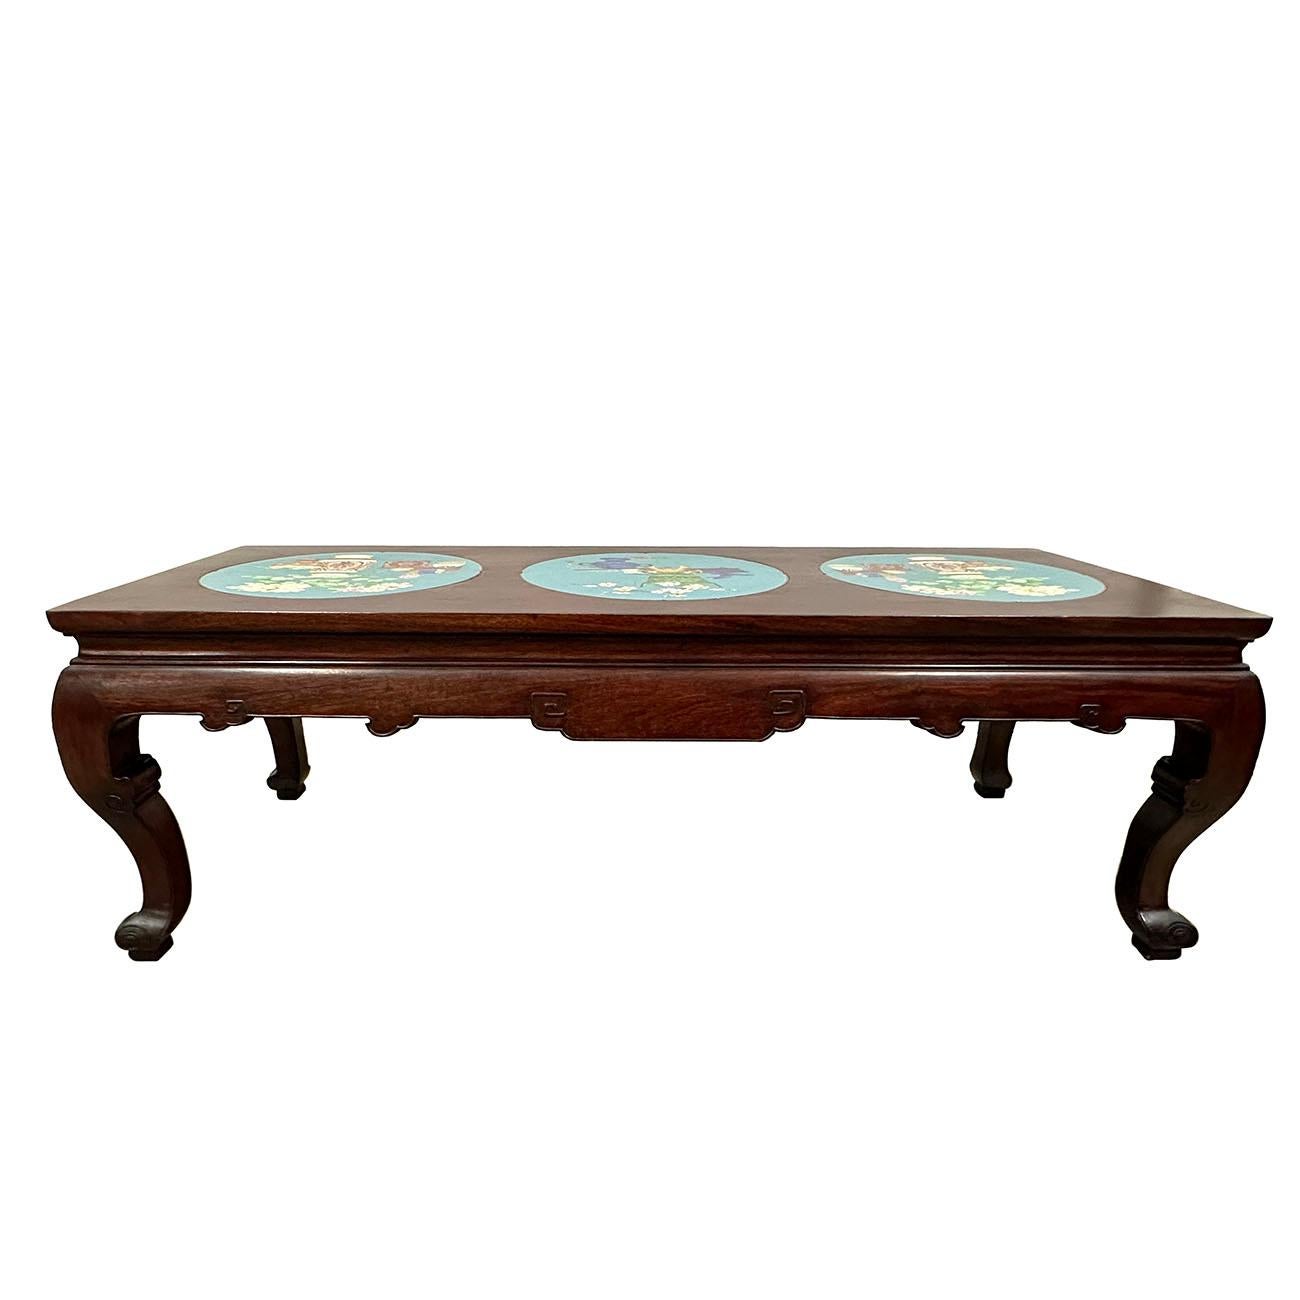 Early 20th Century Chinese Carved Hardwood Coffee Table With Cloisonne Inlay on  For Sale 5